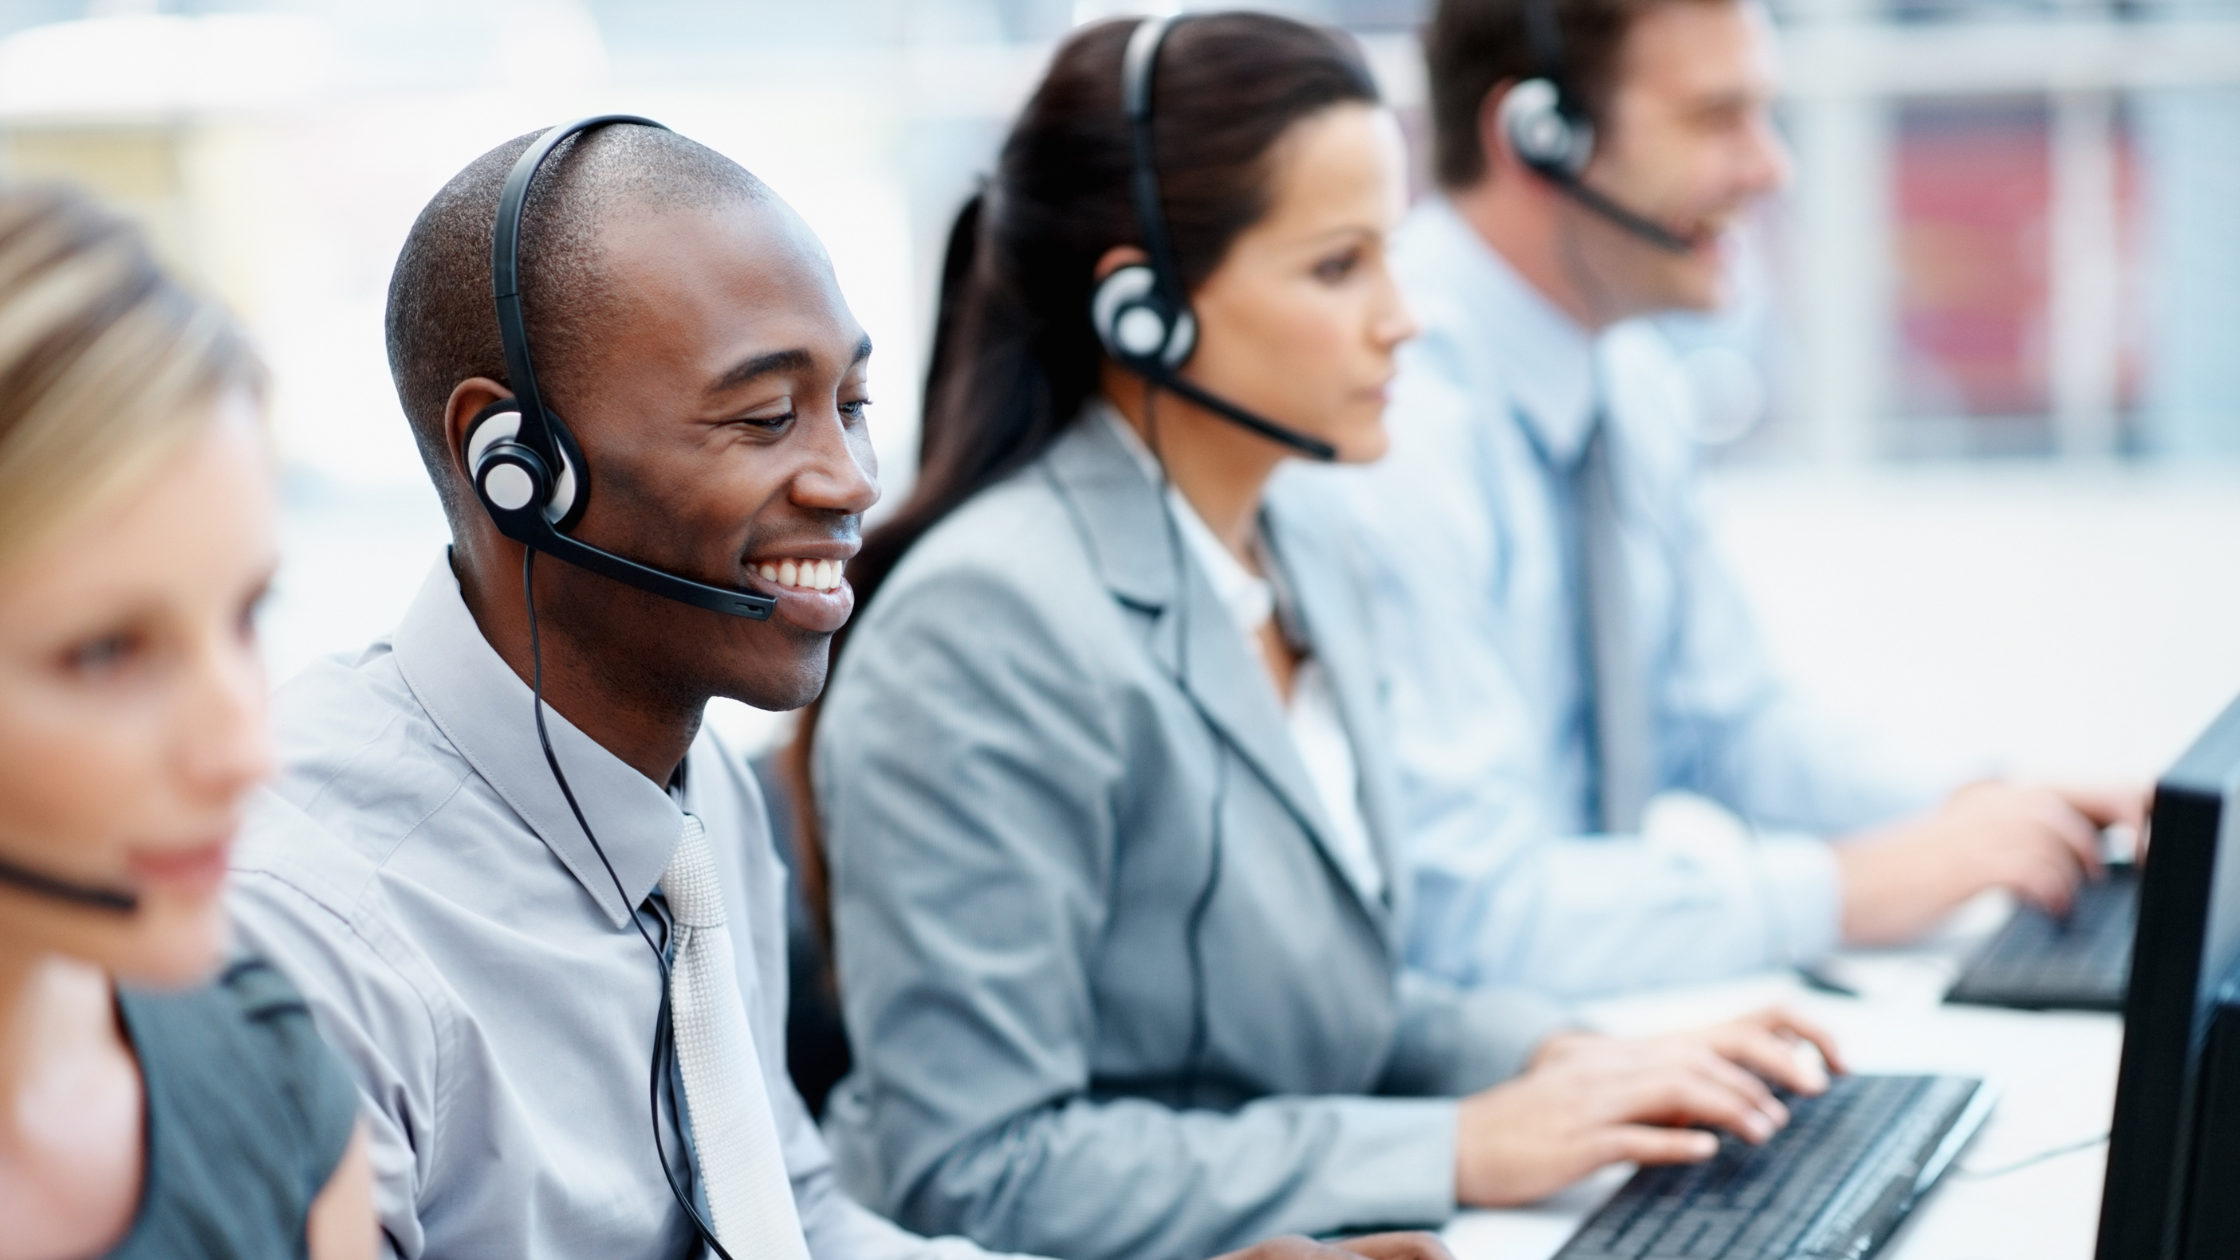 Definition & benefits of contact centre as a service (CCaaS)